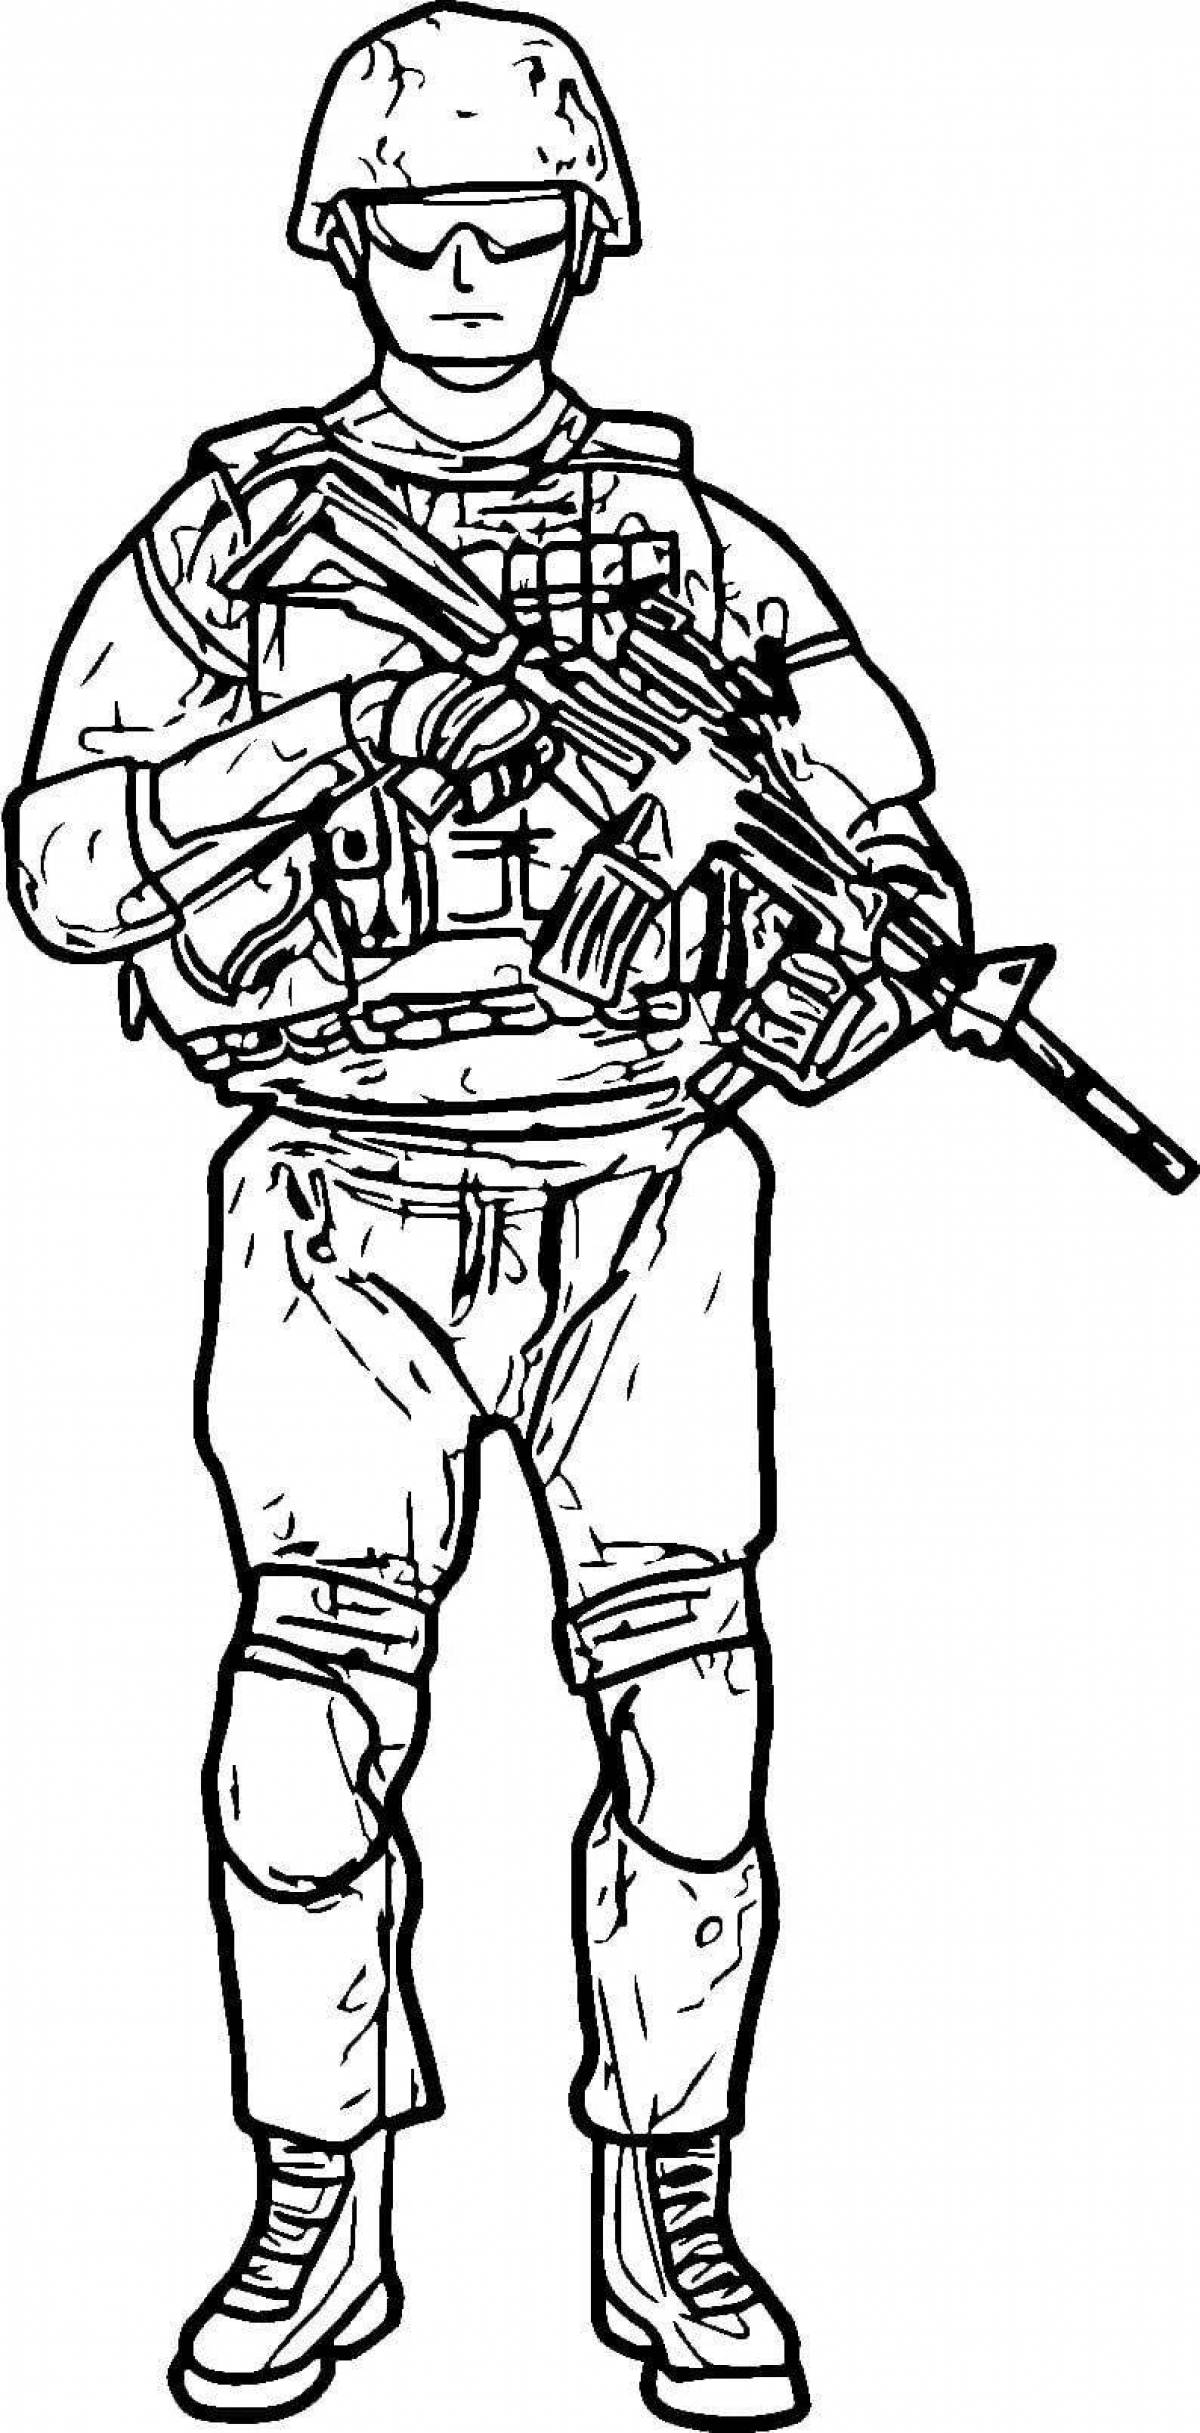 Miniature soldier coloring page